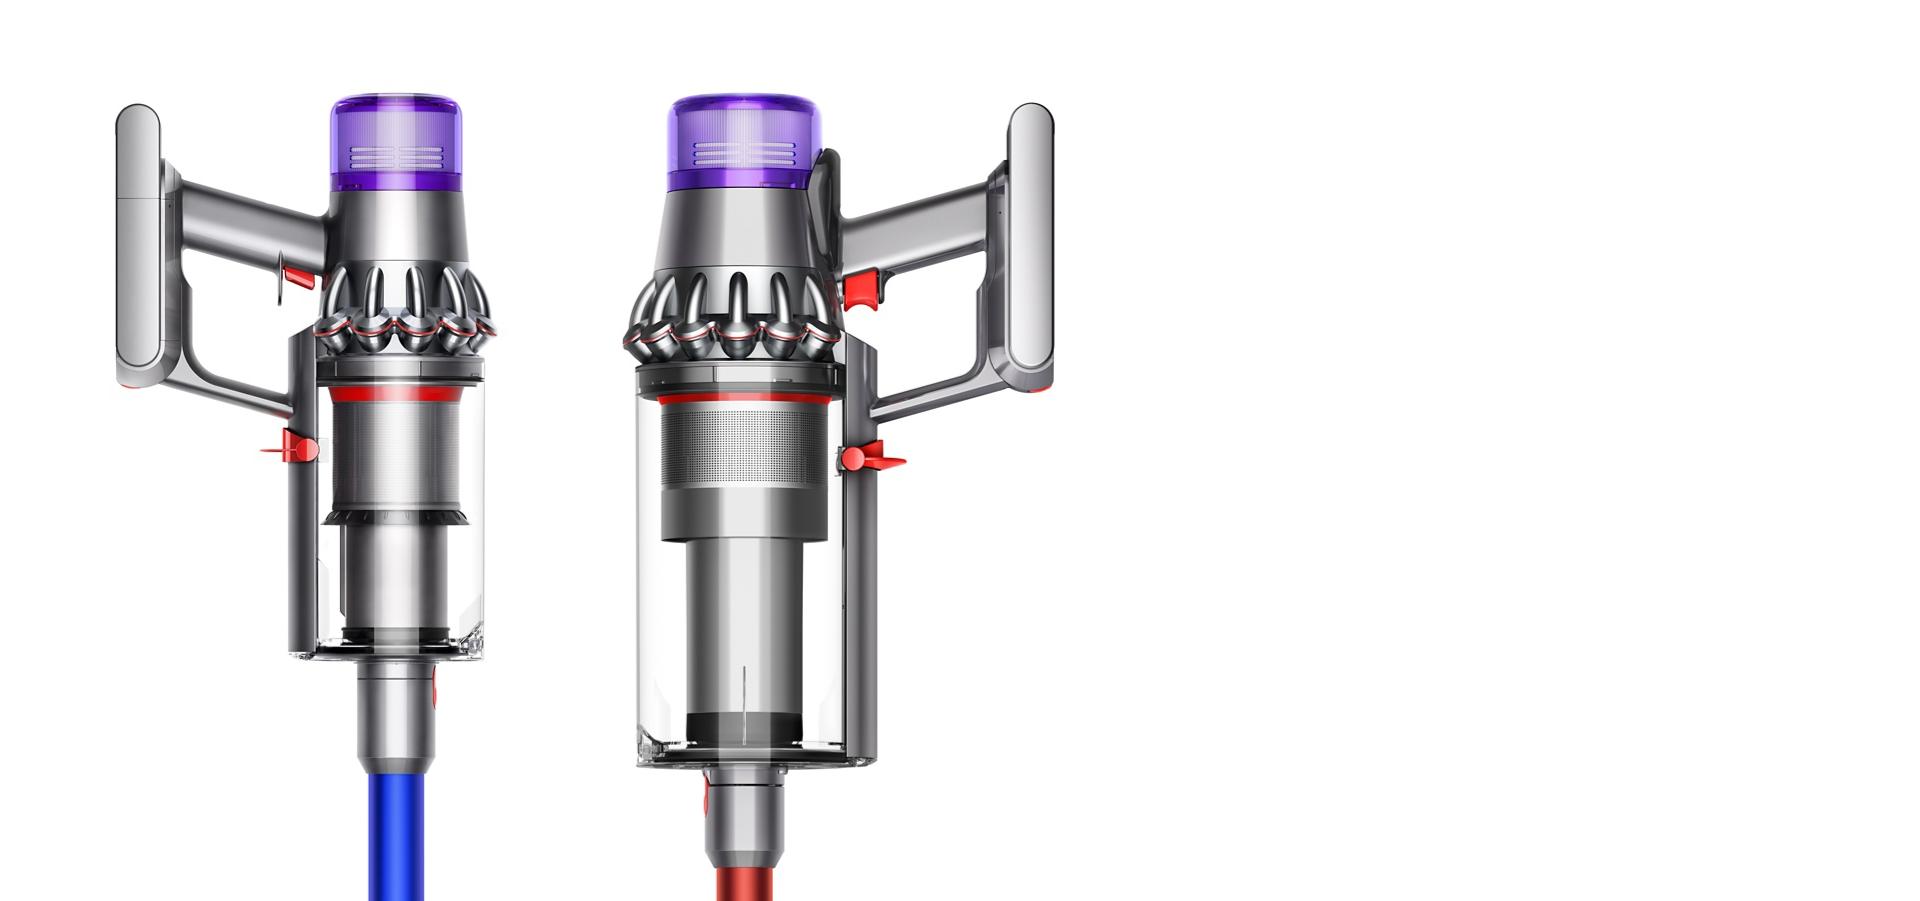 Image of Dyson V11 Absolute Extra next to Dyson V11 Outsize showing differences in bin size